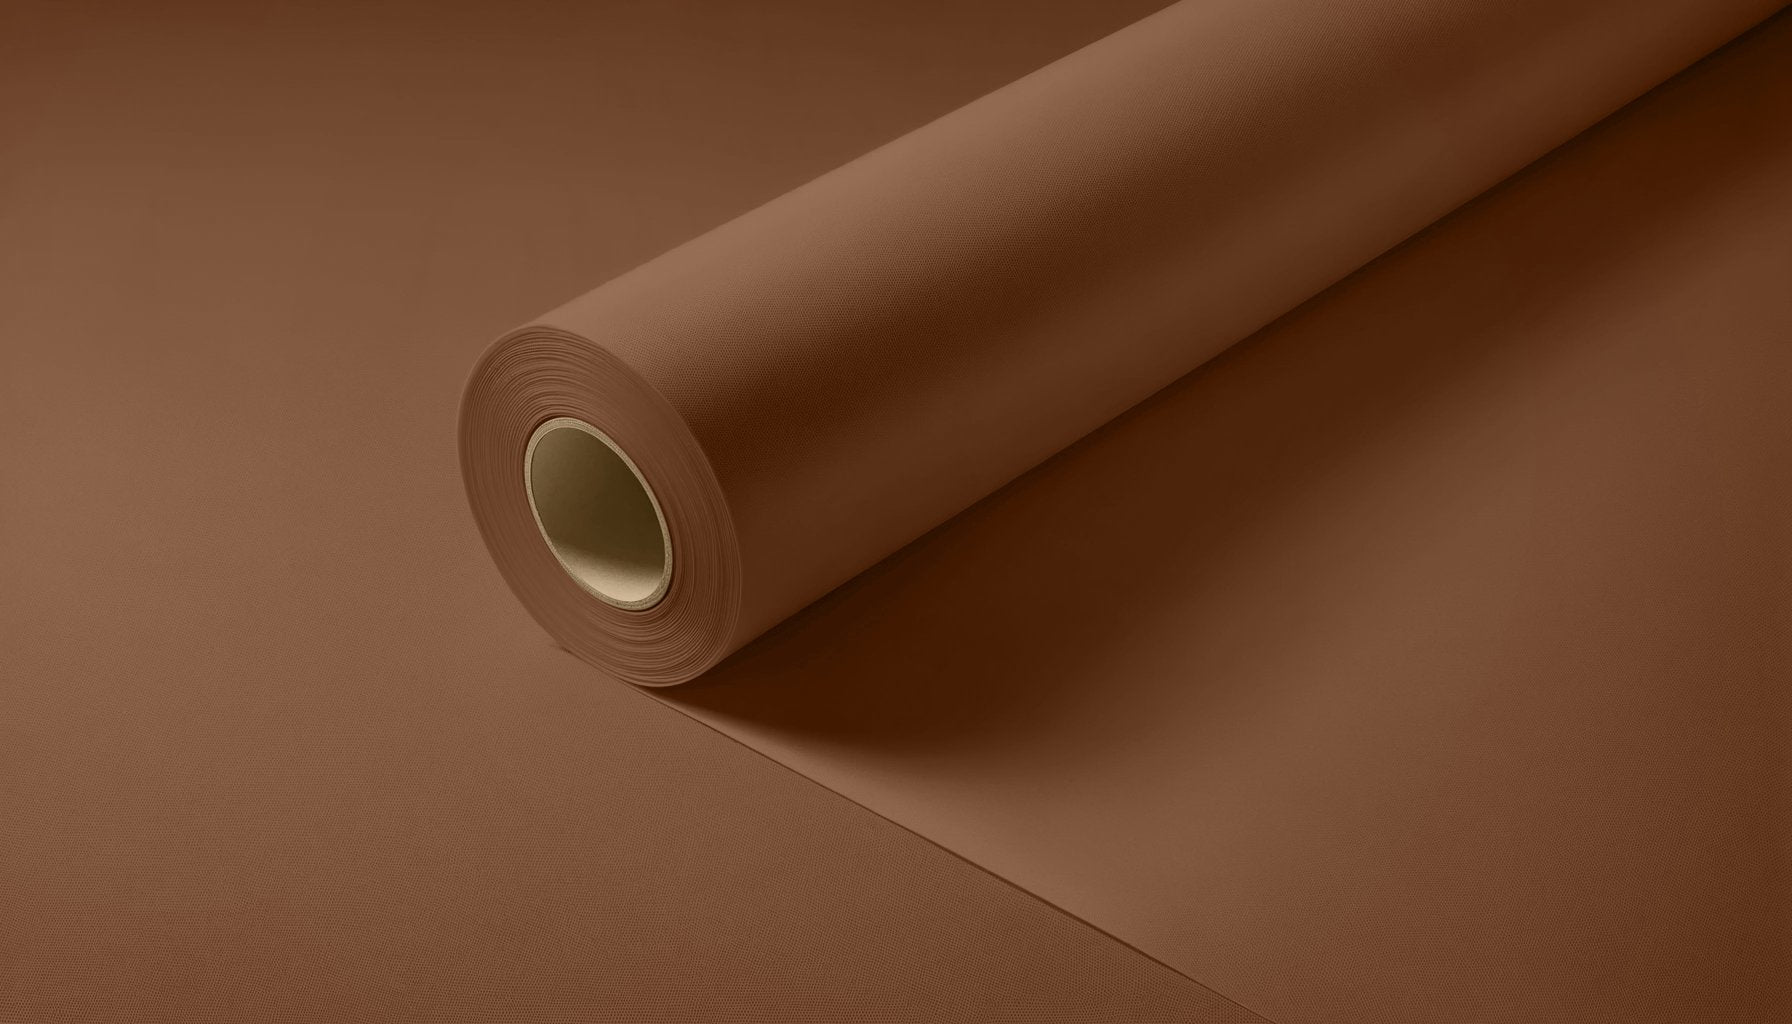 Peel & Stick Removable Re-usable Paint - Color RAL 8024 Beige Brown - offRAL™ - RALRAW LLC, USA